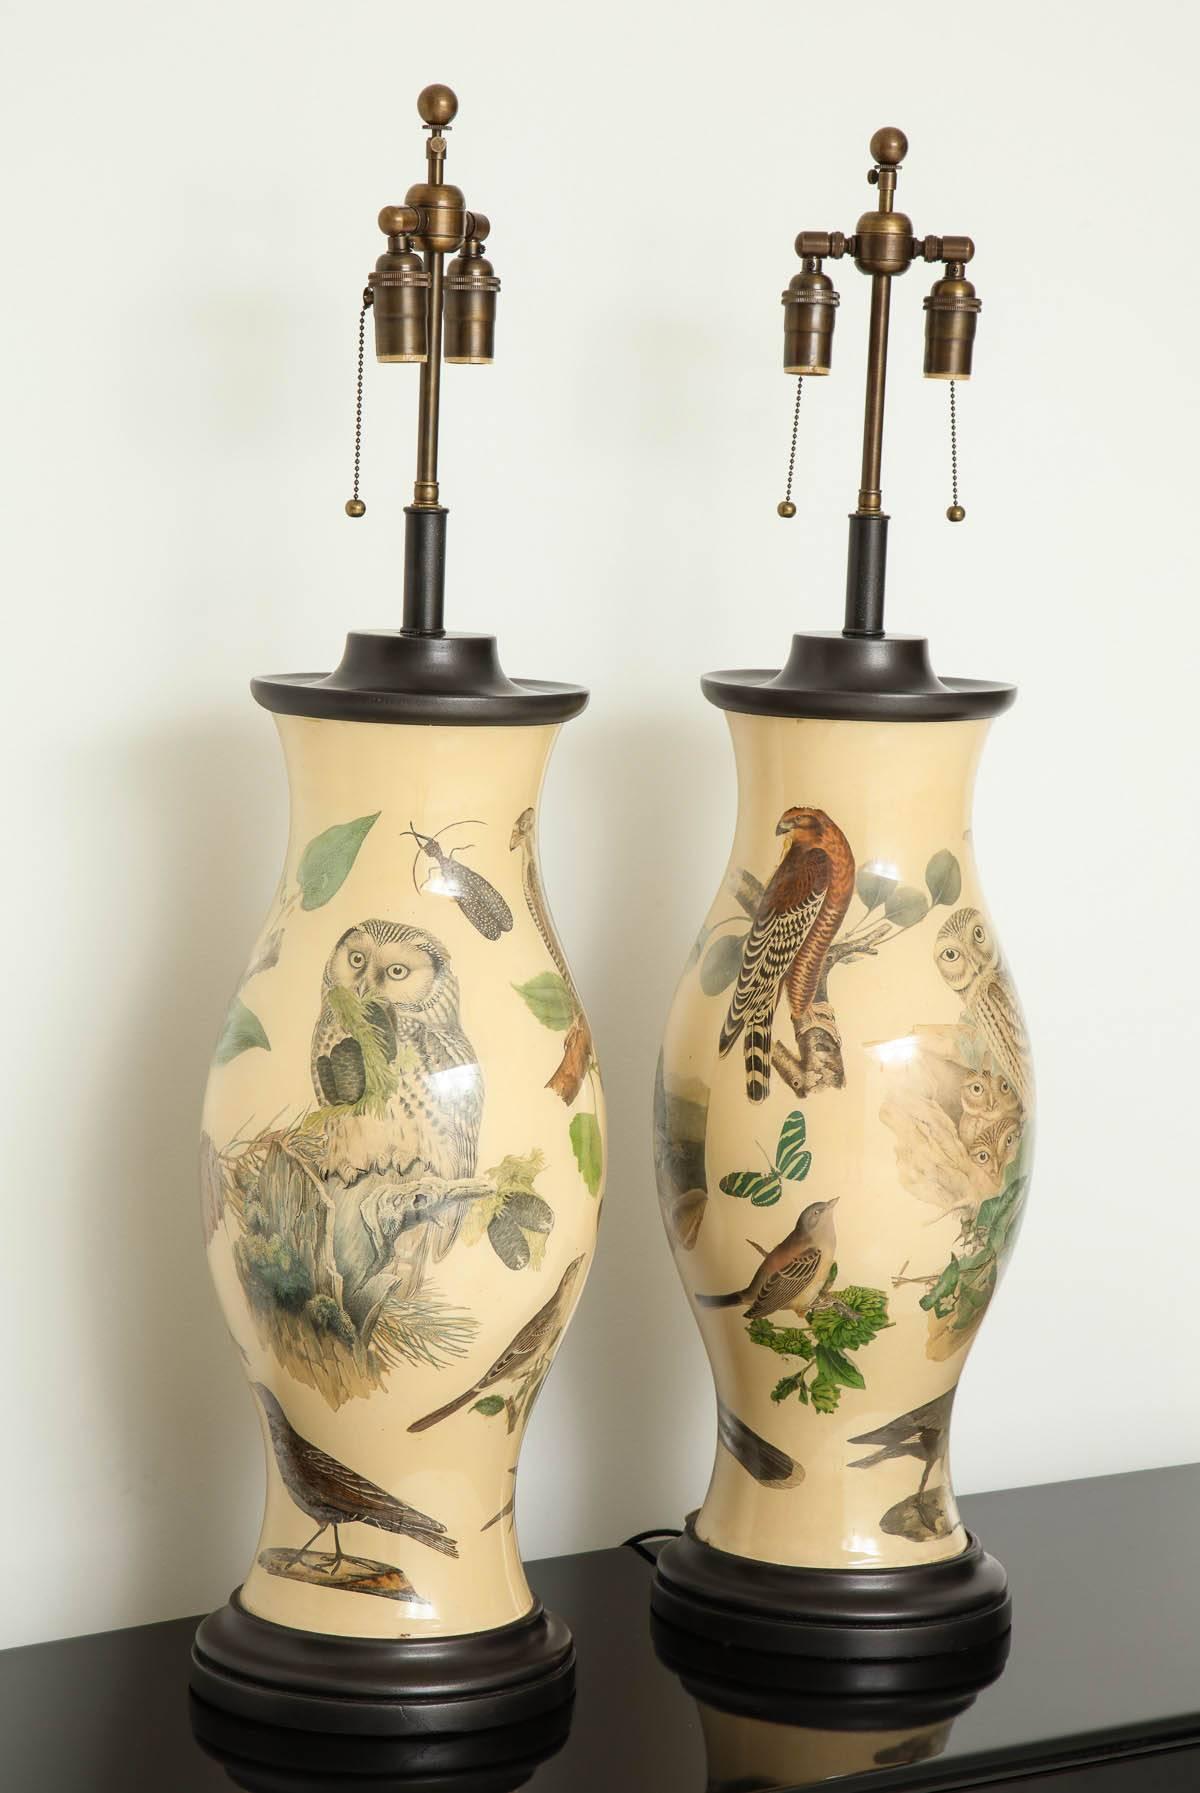 Stunning pair of Large decoupage lamps.
The inside surface of the glass lamps have been  beautifully decorated with wildlife decals which are applied on a lovely soft tan background.
The lamps have been Newly rewired with   Antique bronze double